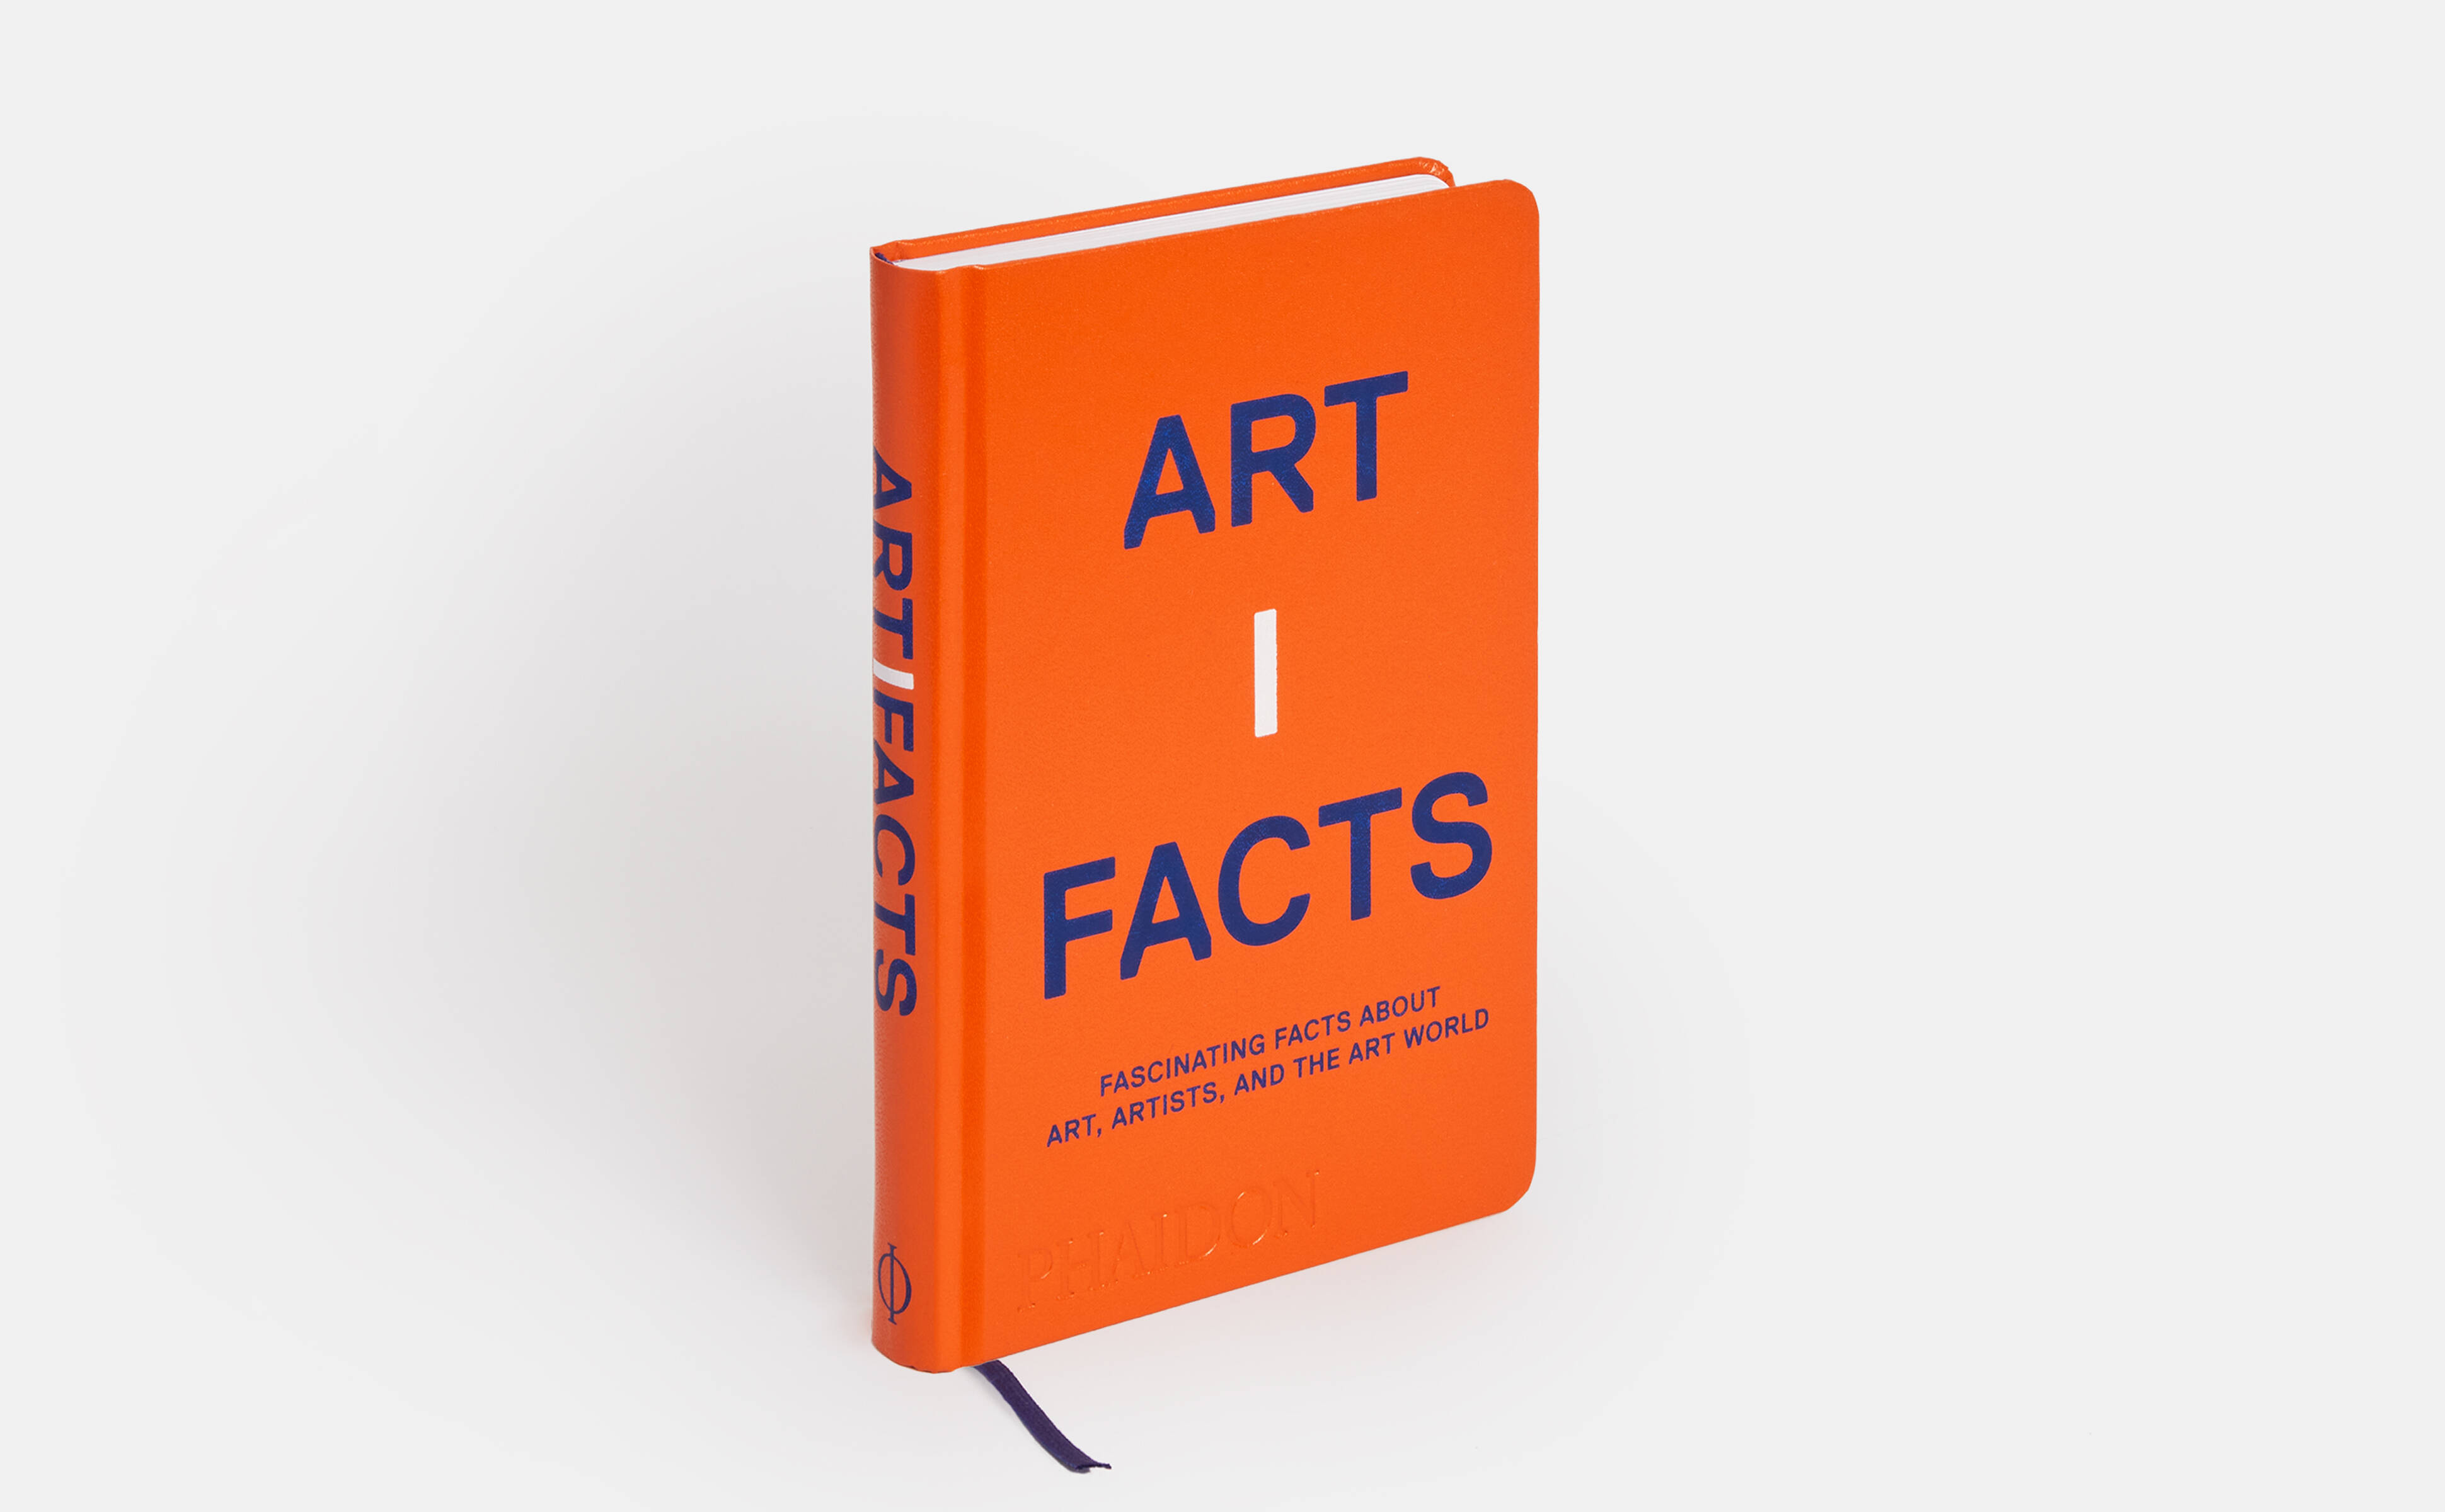 Can’t live off art? Don’t worry. These are the odd careers that artists choose before they make it, according to our new book, Artifacts